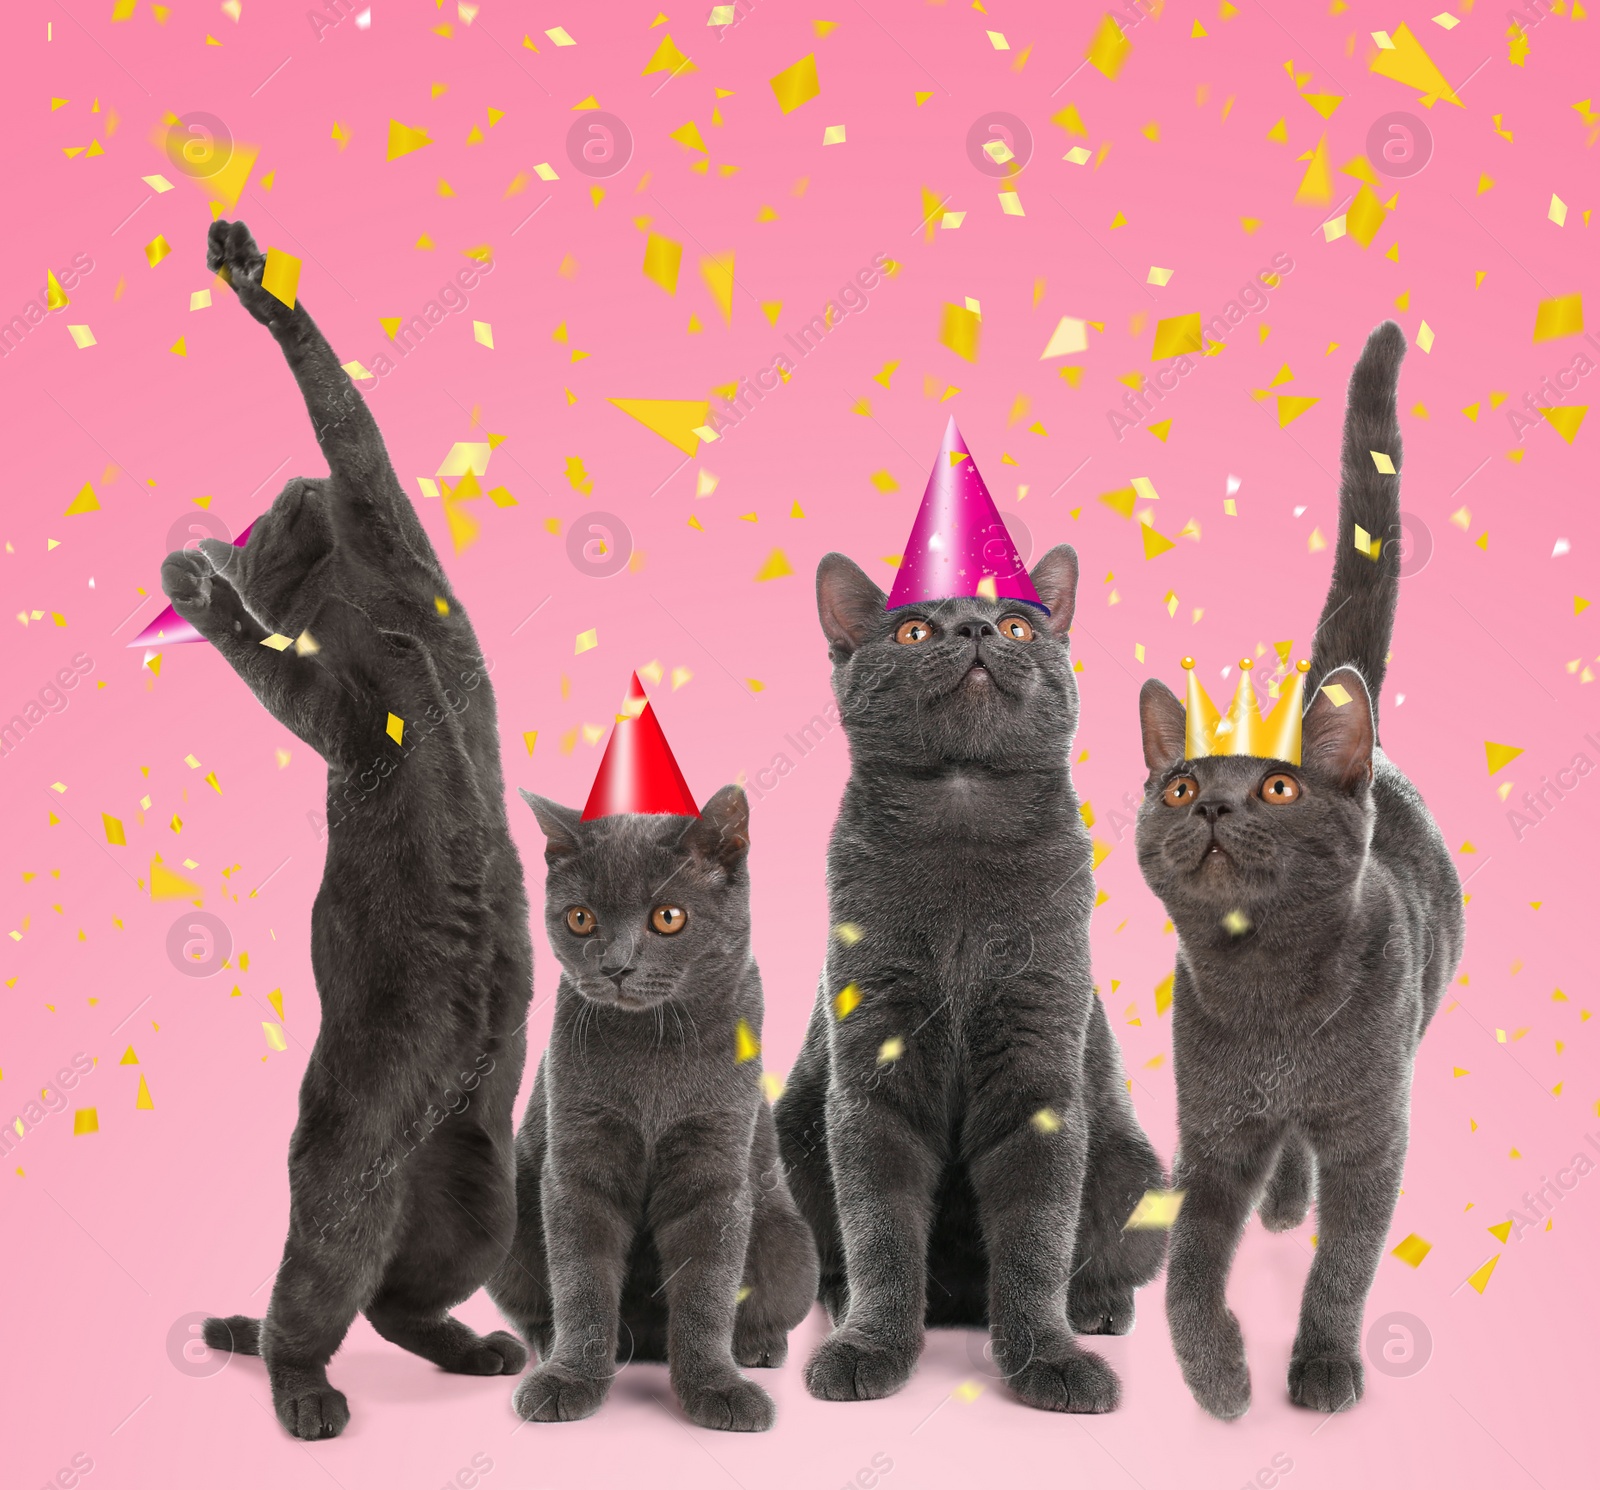 Image of Adorable cats with party hats on pink background